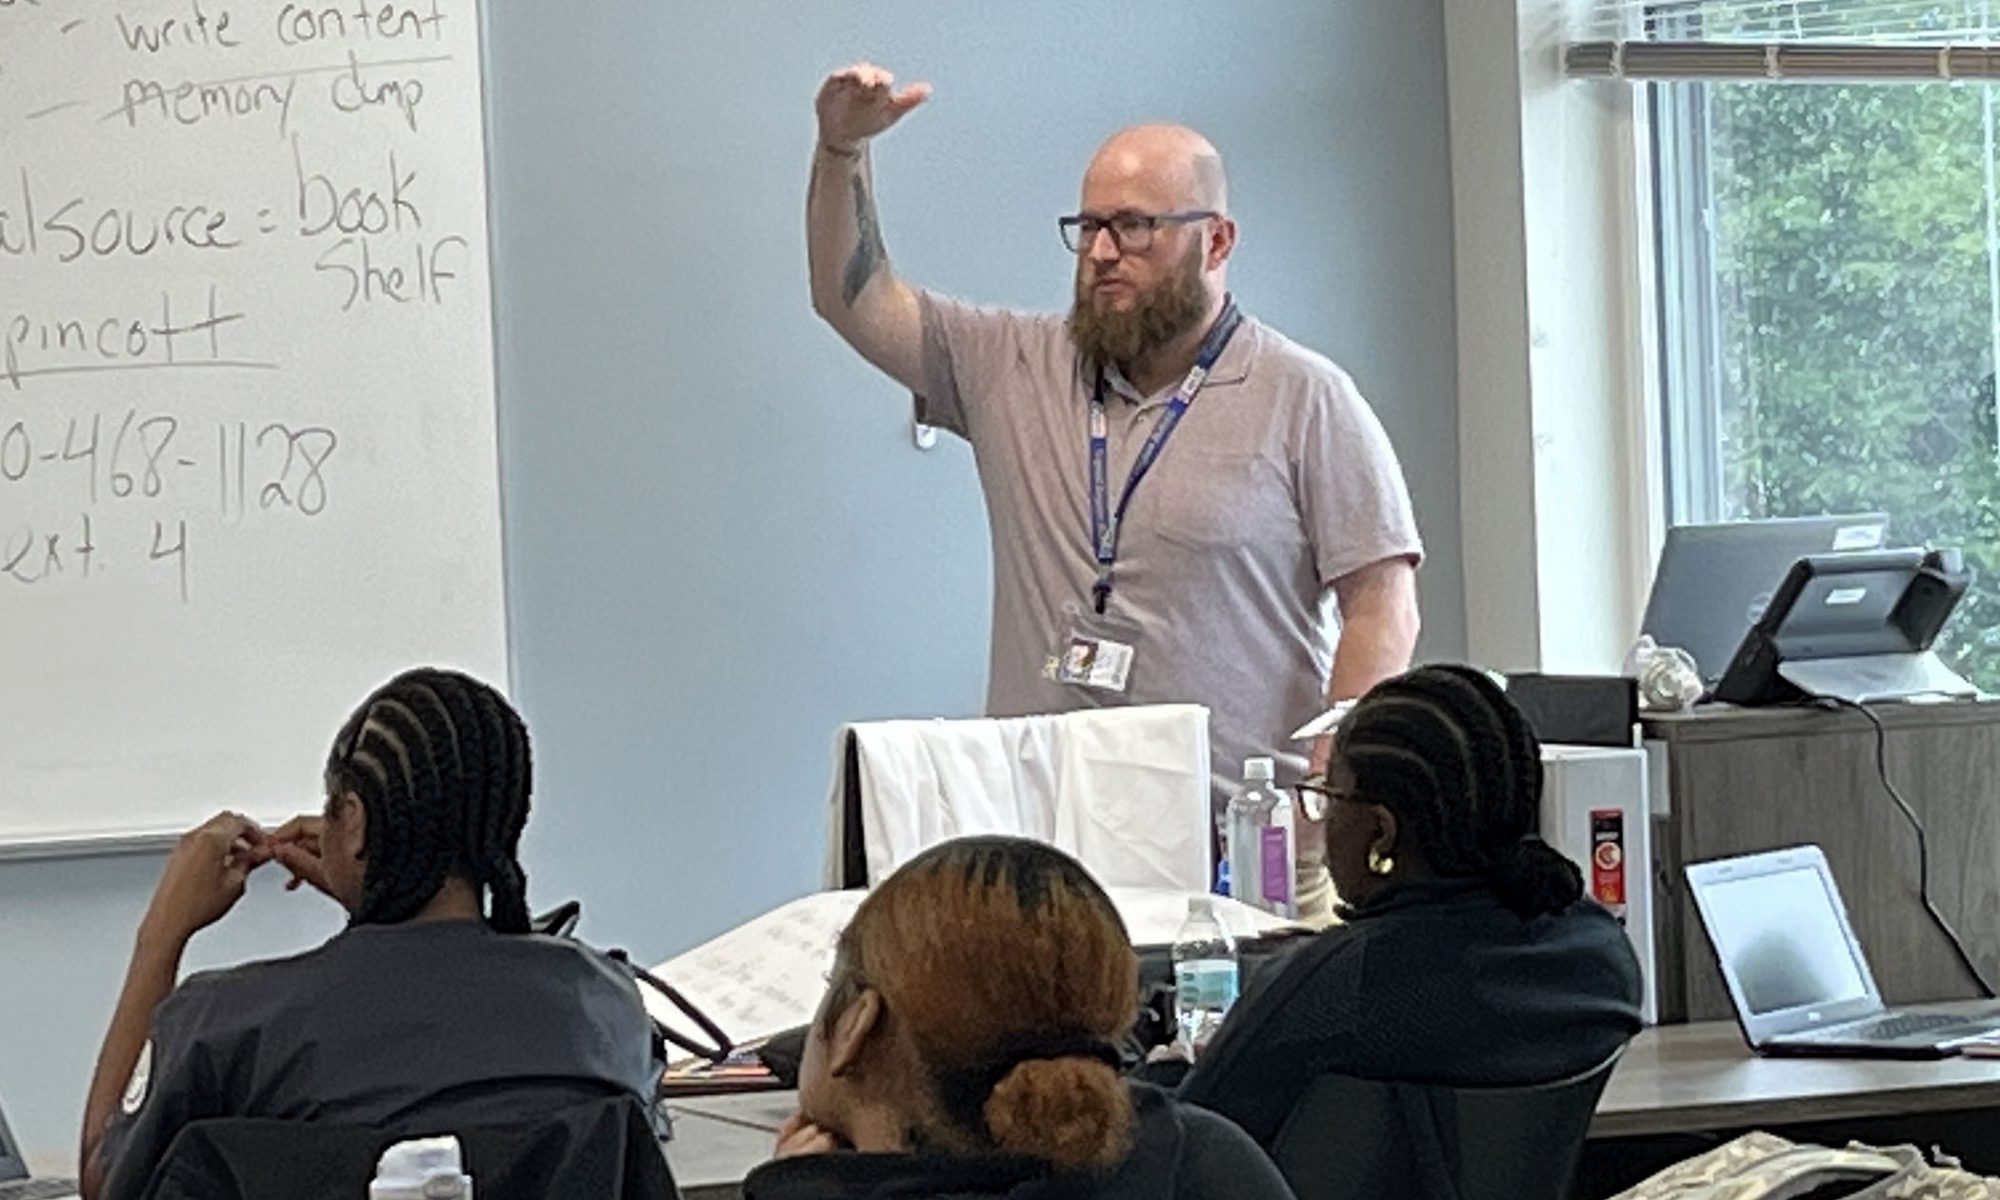 Teacher wearing a grey polo shirt stands with his right hand up high to demonstrating the height of something as he speaks before a classroom of students.